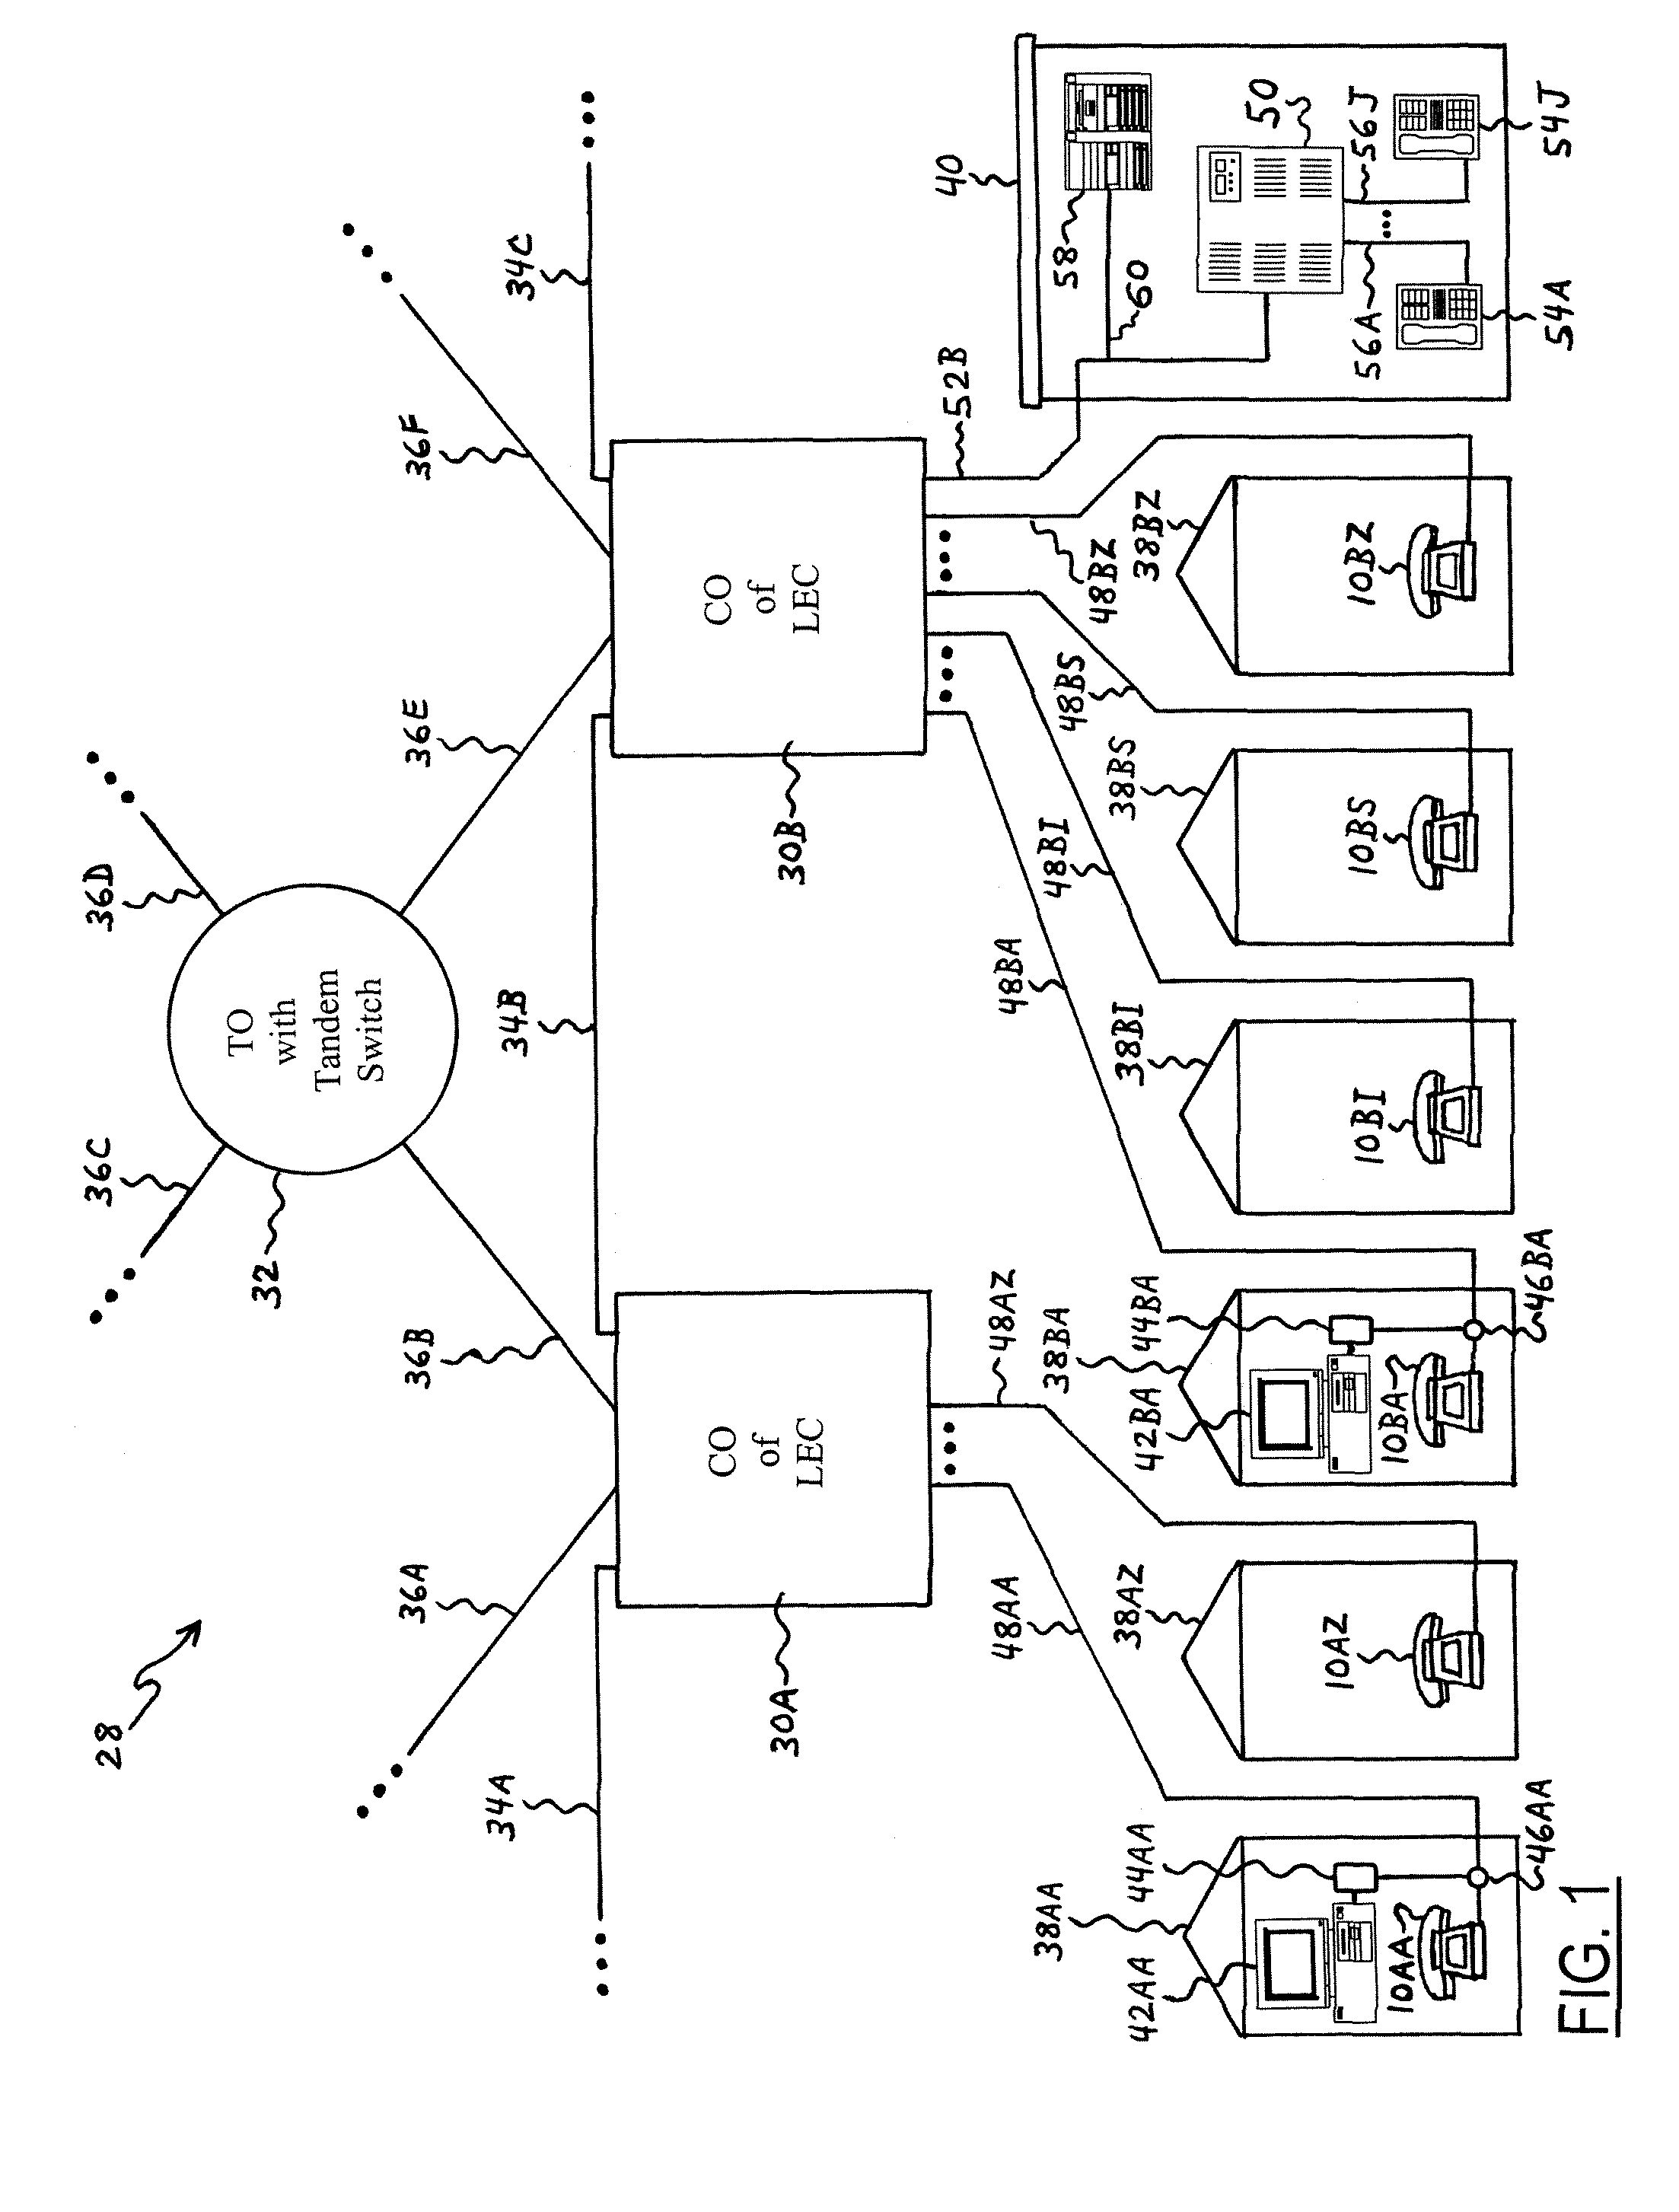 Method and system for communicating information to a caller on a telephone network by superimposing an audible information message over a dial tone